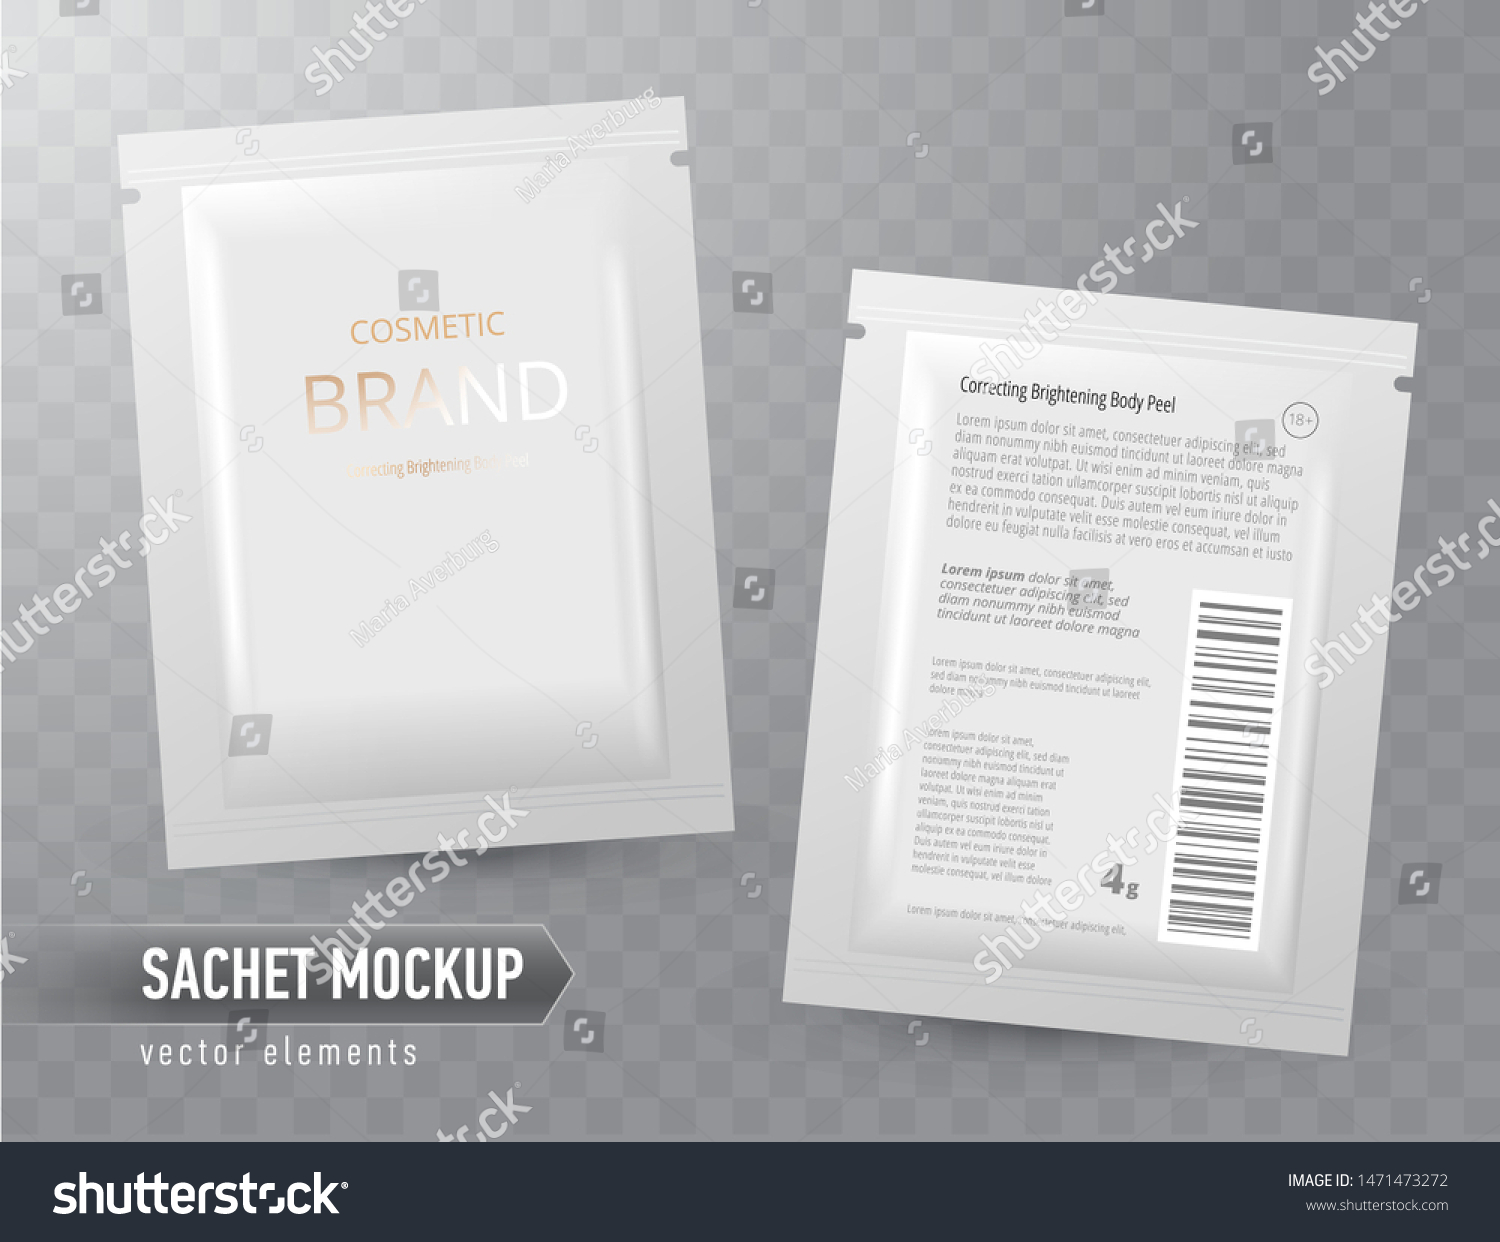 Download Vector Realistic Blank Package Disposable Foil Stock Vector Royalty Free 1471473272 PSD Mockup Templates